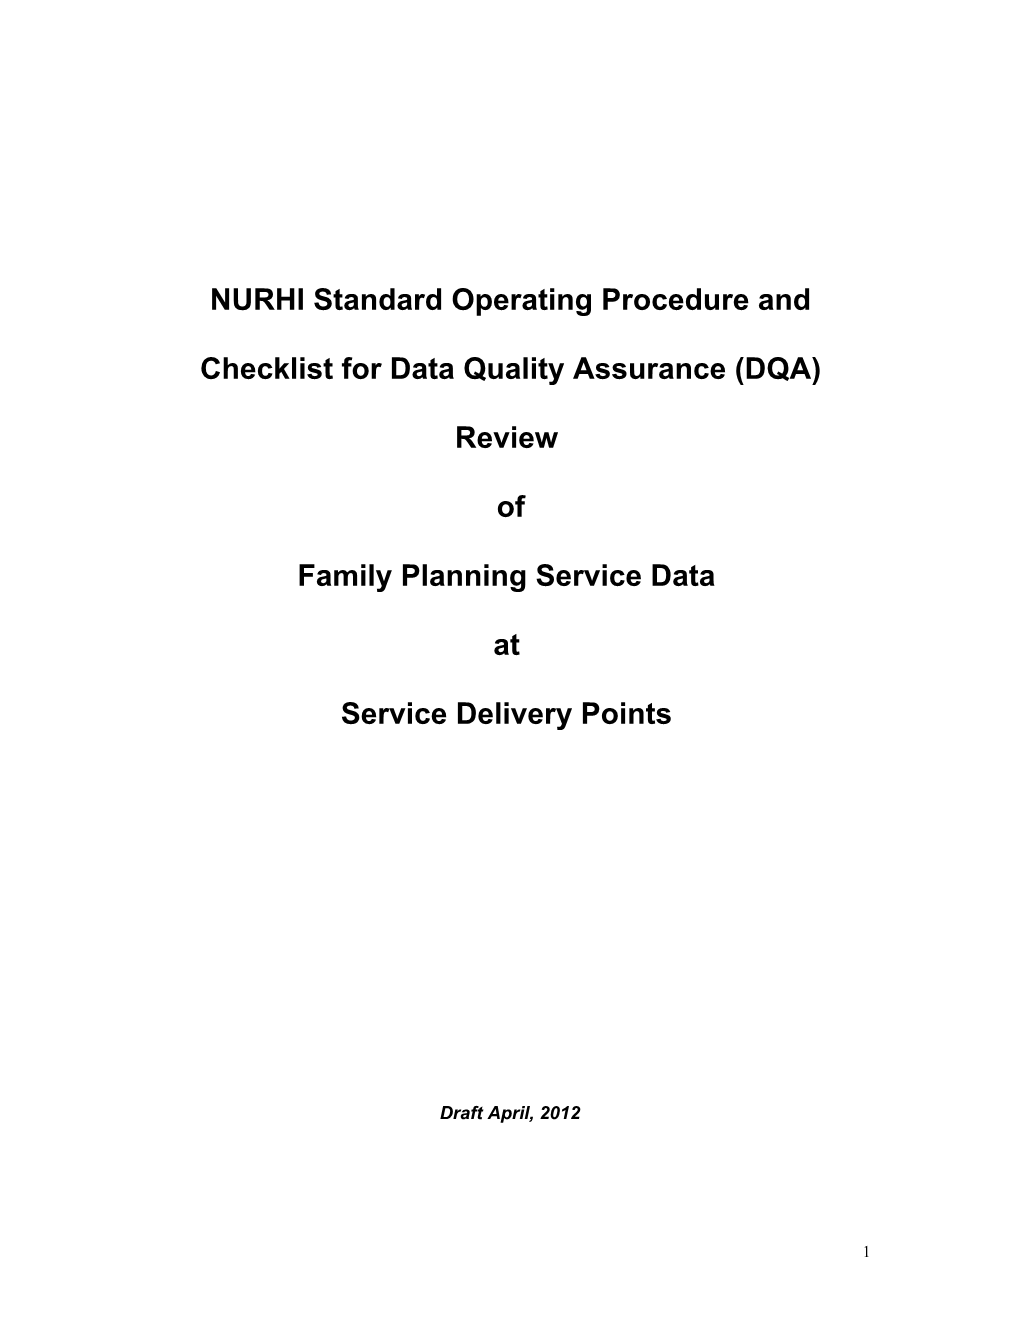 Checklist for Data Validity Review